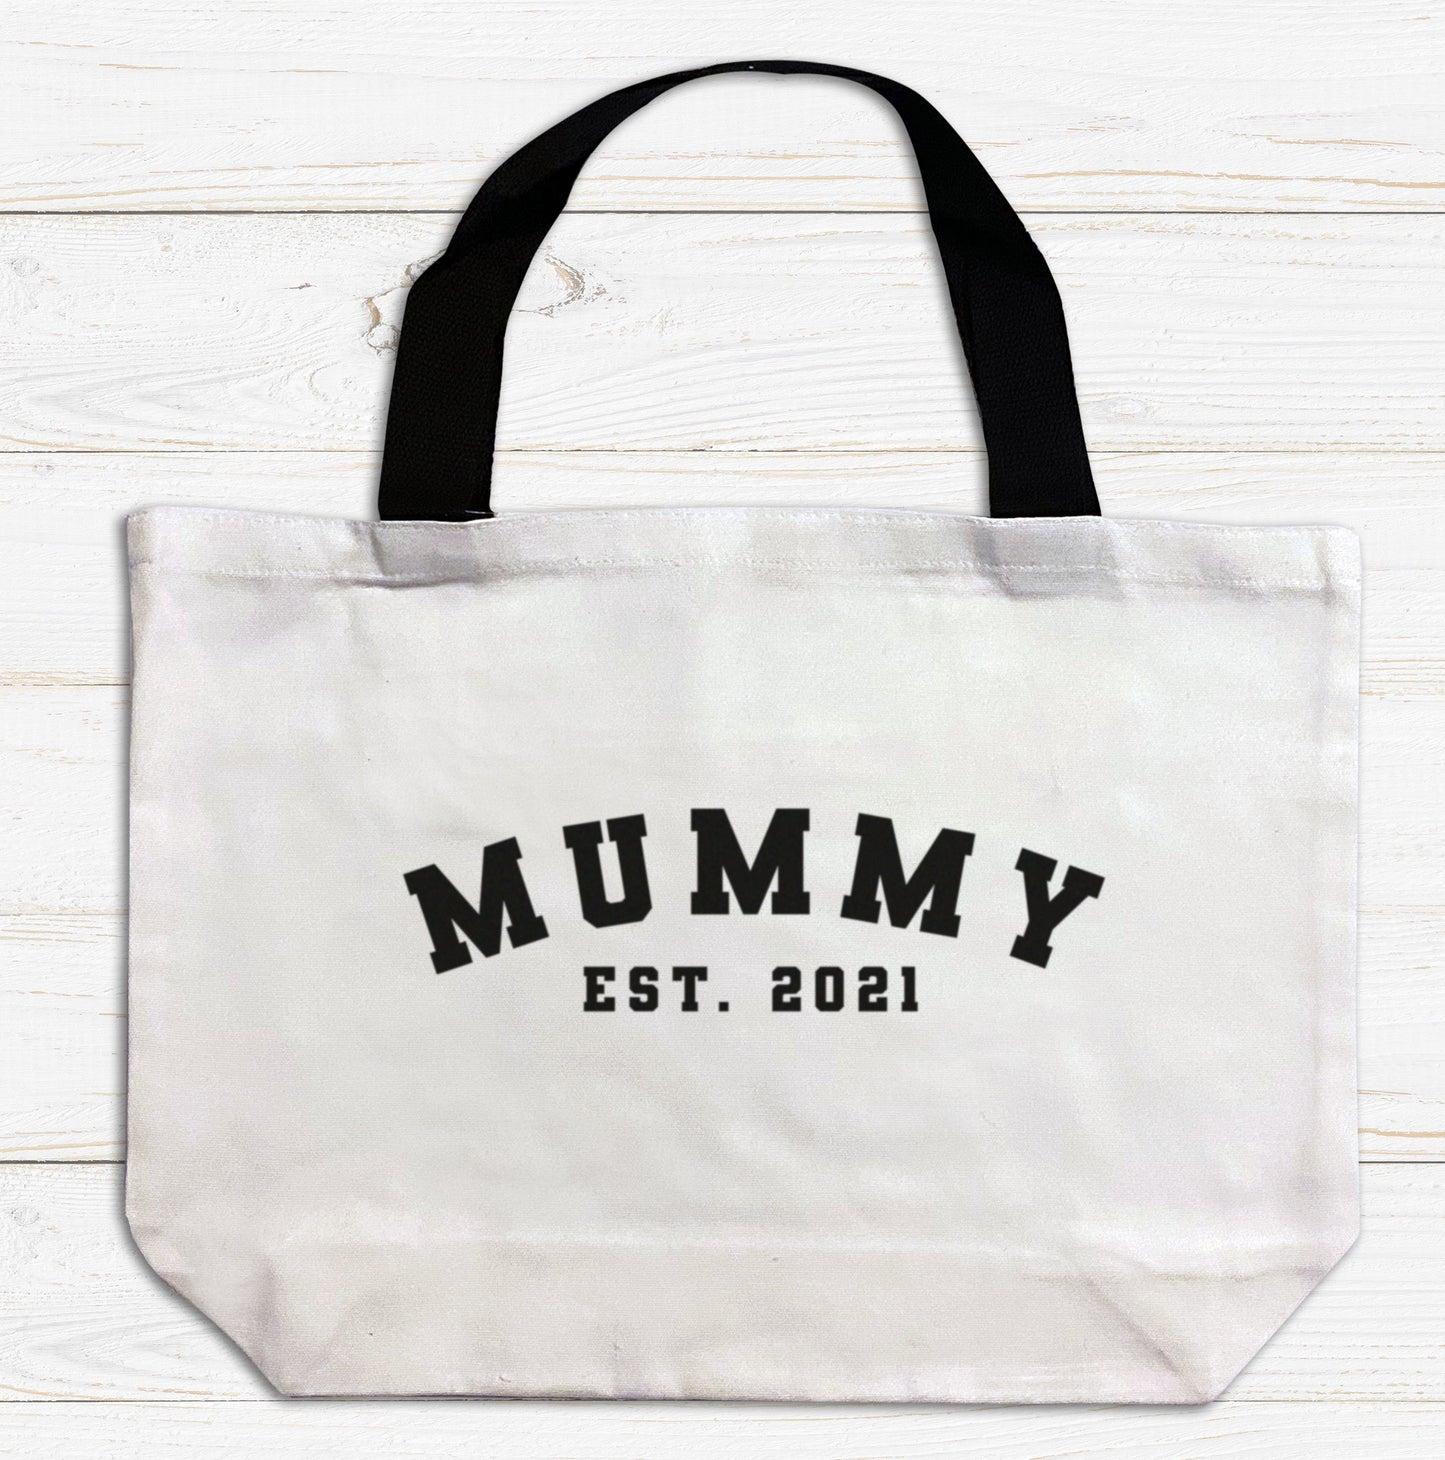 Mummy Est. Large Tote Bag. Large Shopping bag. Birthday Gift. Mother's Day Gift Unique Gift Idea. Cute Tote Bag. Gifts for her.